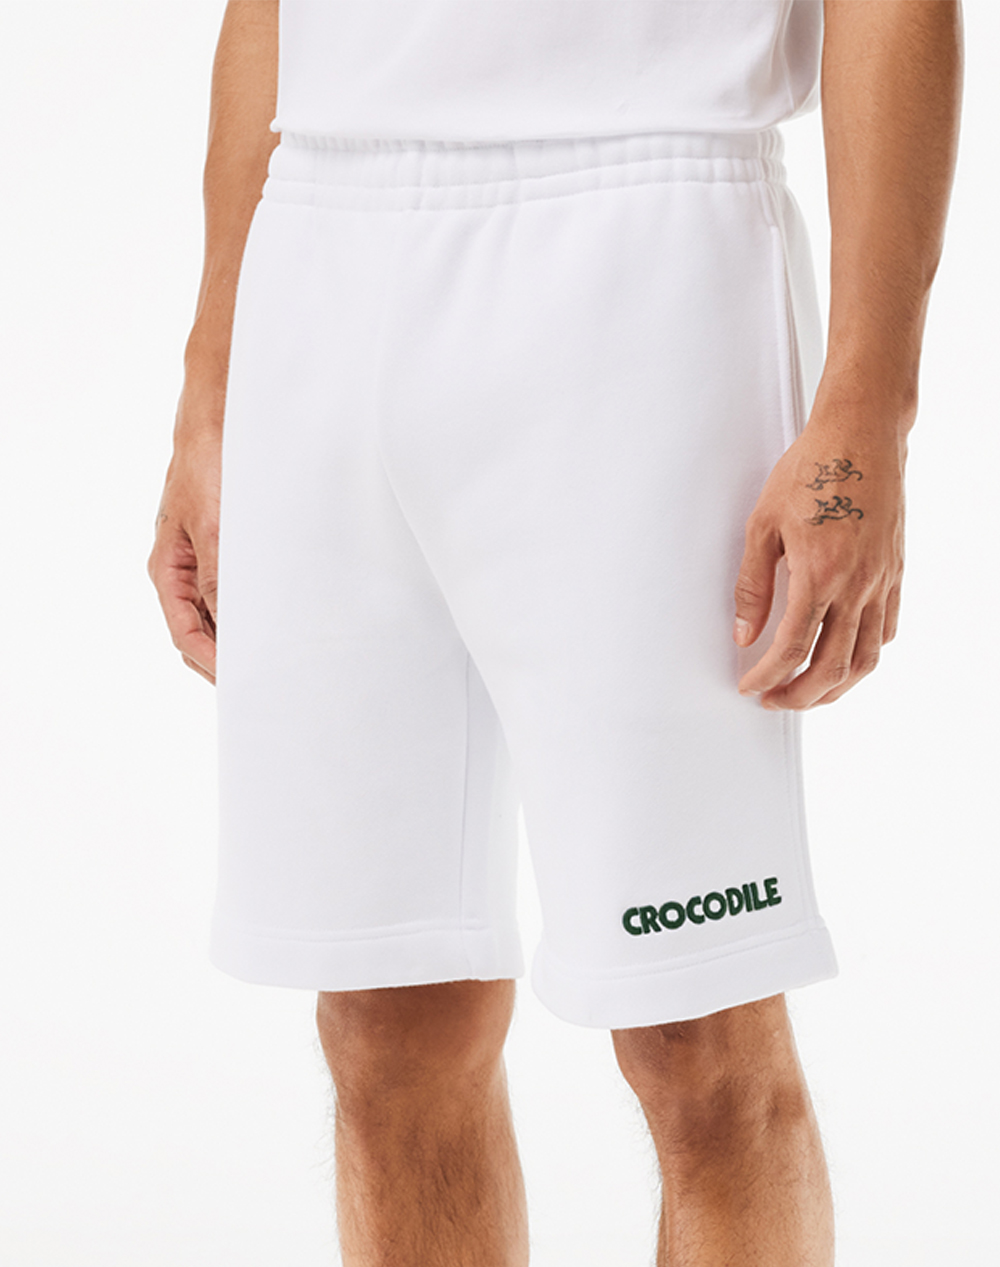 LACOSTE ΣΟΡΤΣ SHORTS 3GH8019-001 White